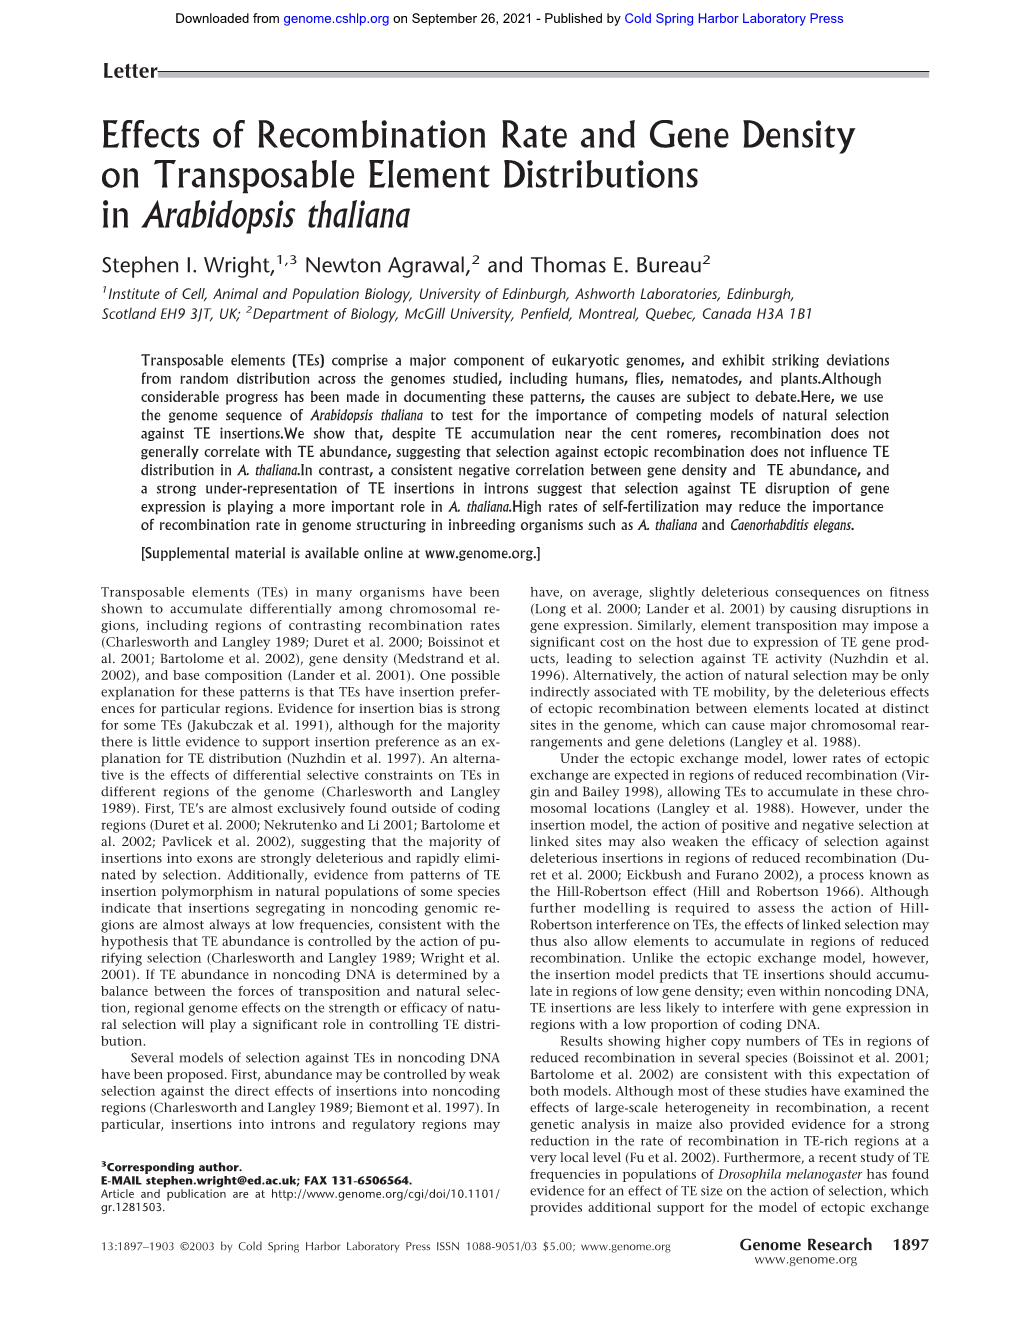 Effects of Recombination Rate and Gene Density on Transposable Element Distributions in Arabidopsis Thaliana Stephen I